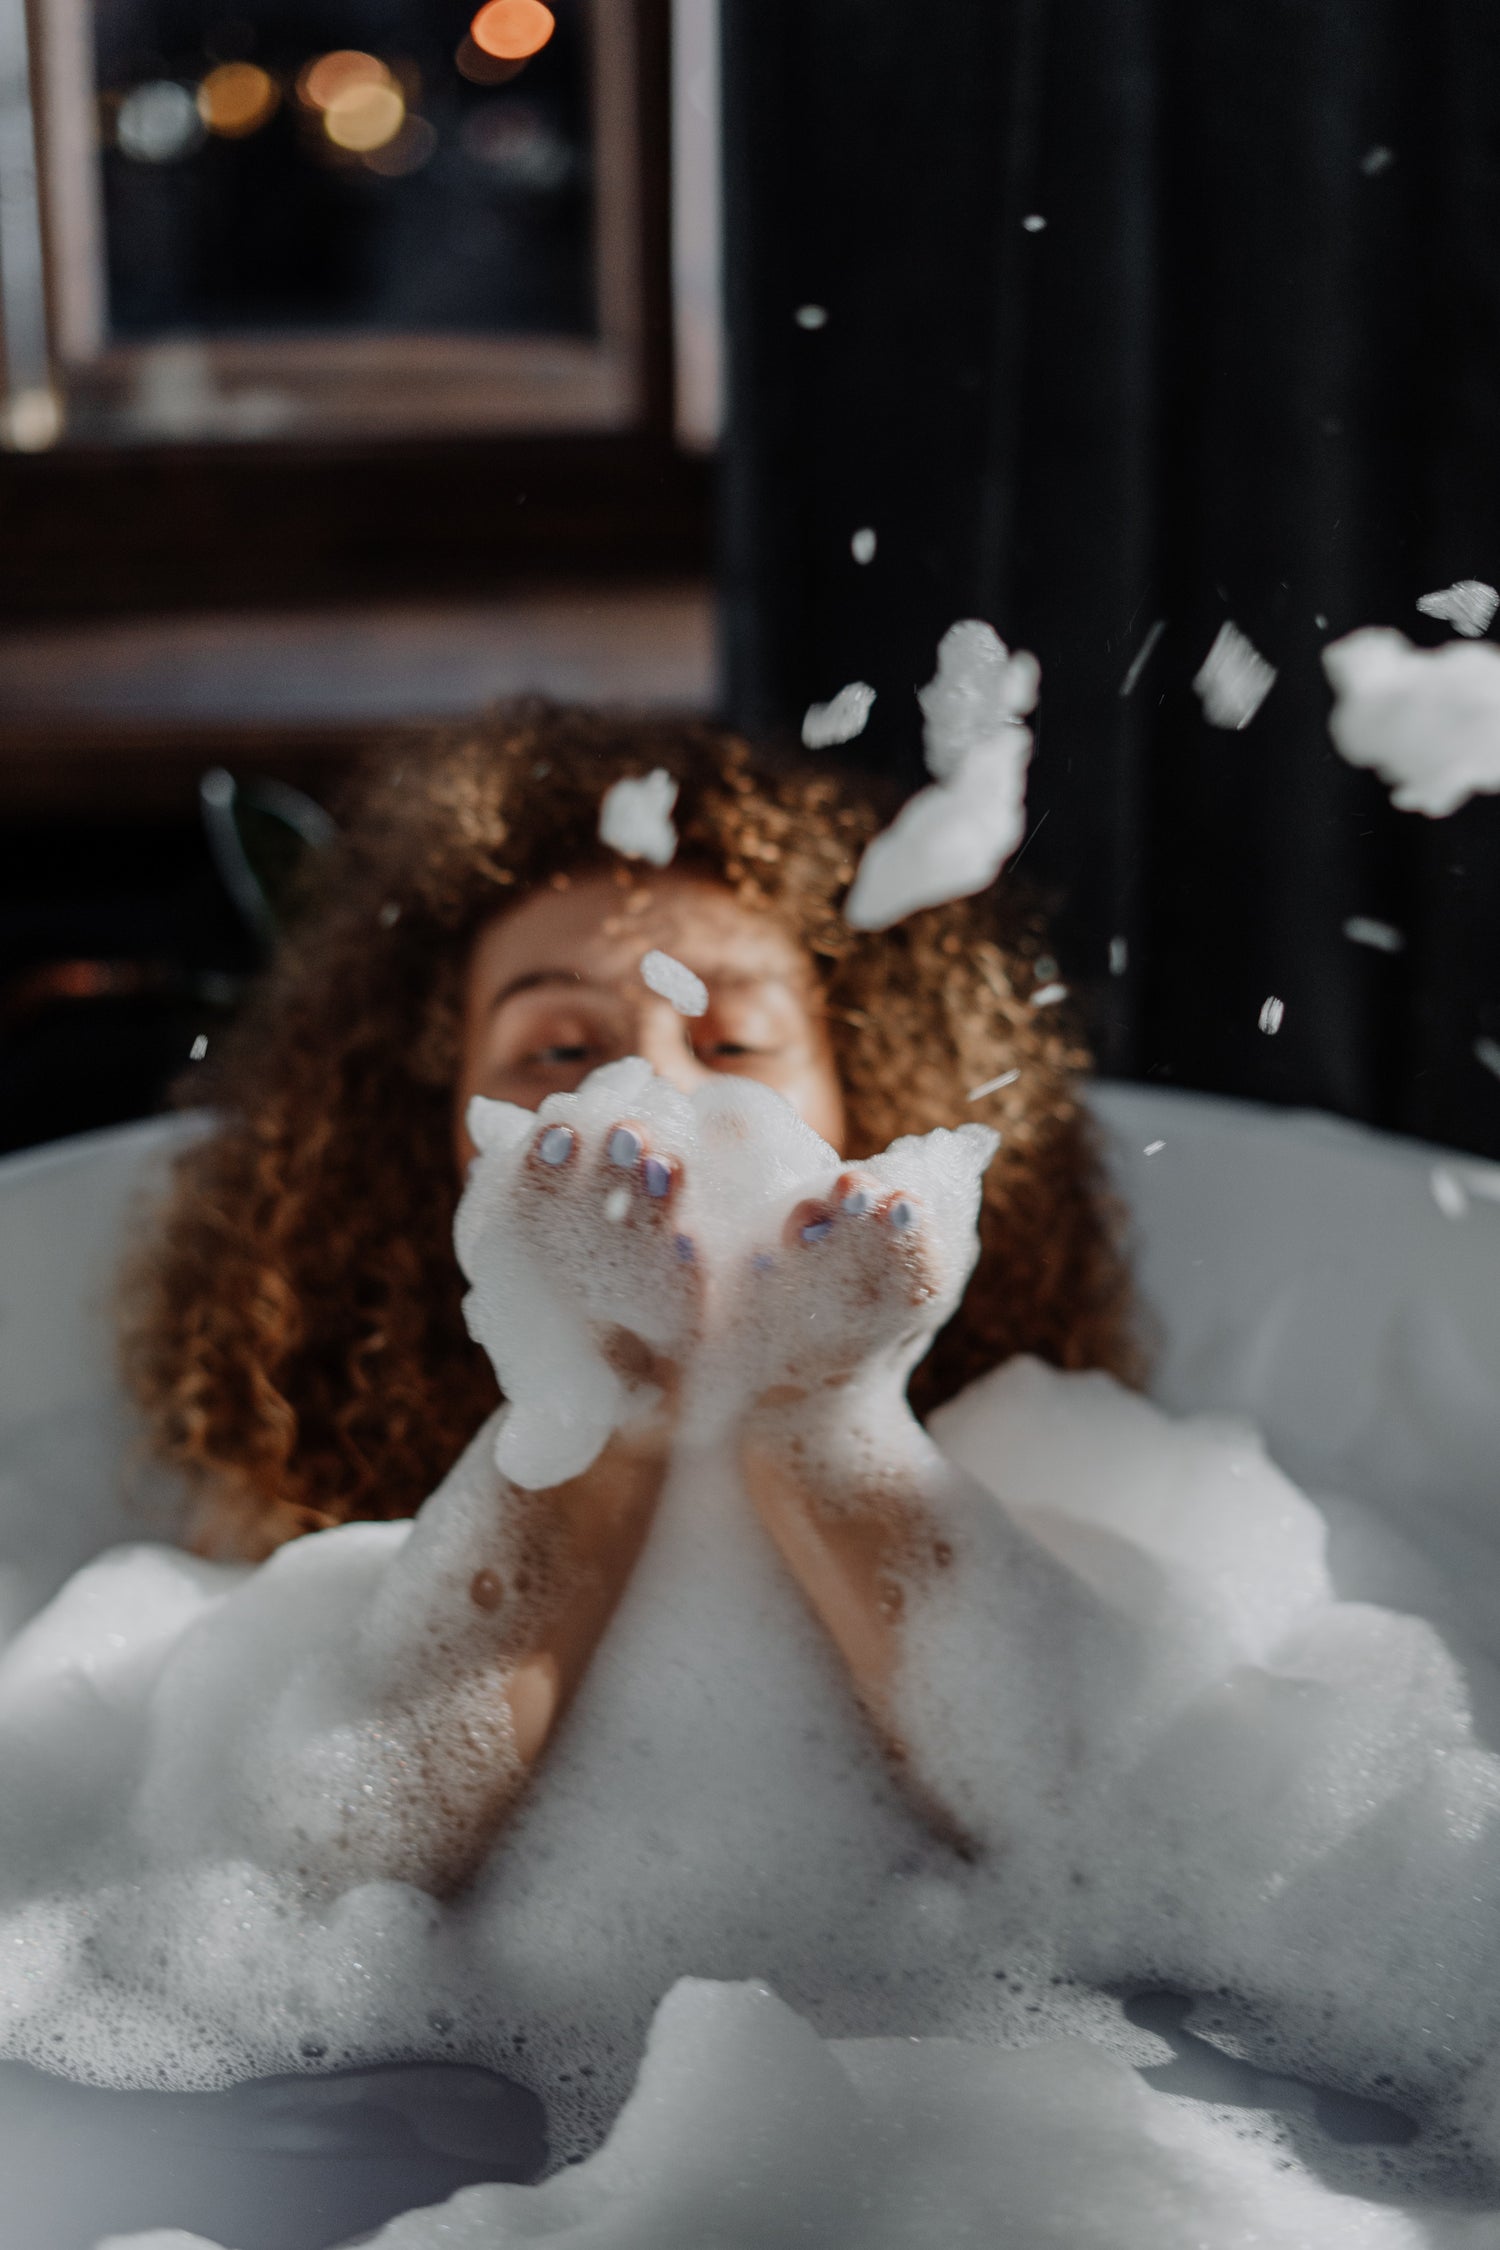 photo by Cottonbro Studio - Image of woman in a bathtub blowing bubbles from her hands.